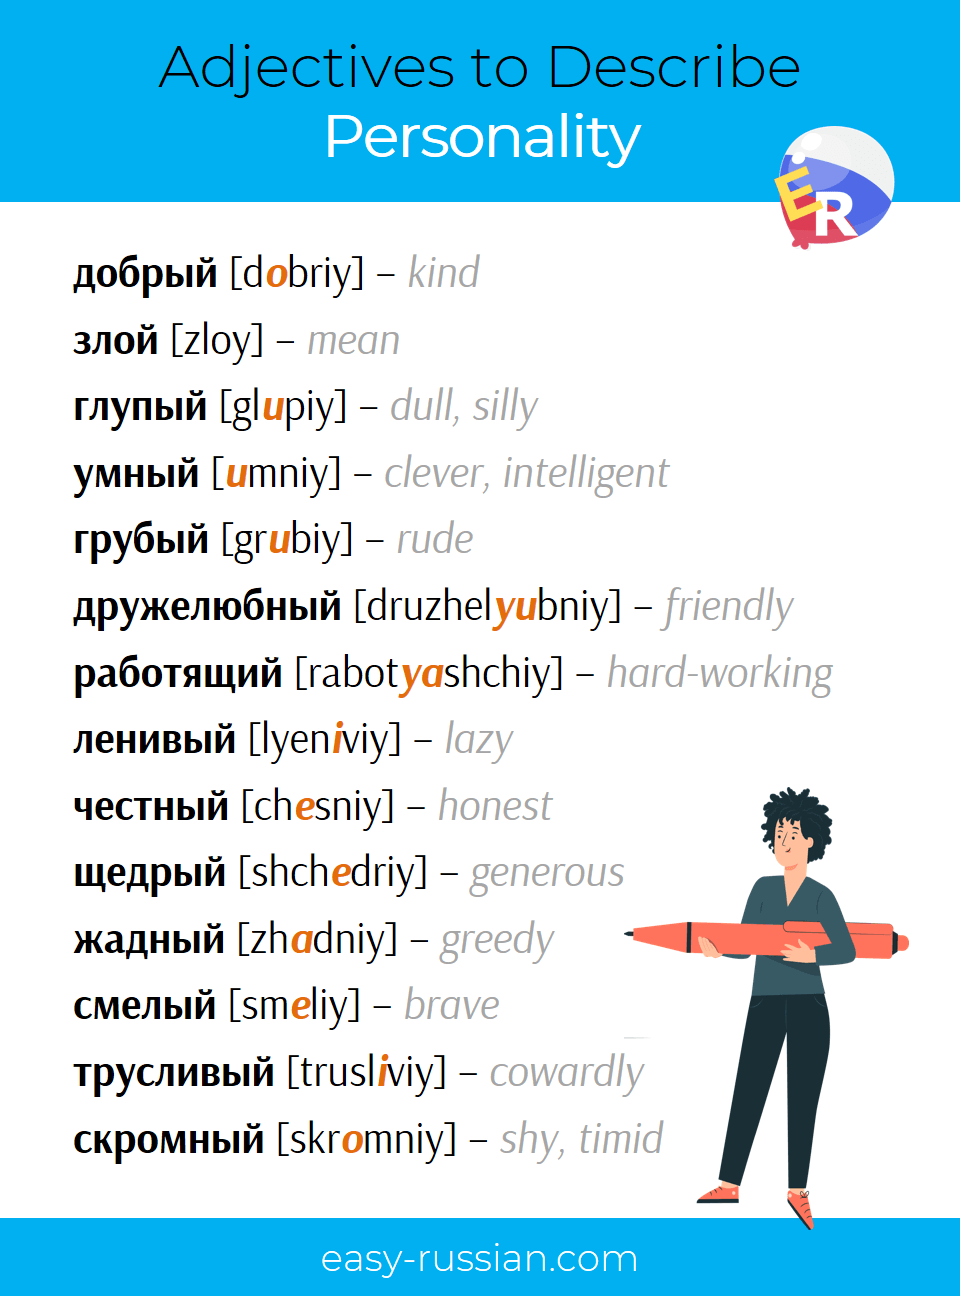 Adjectives to Describe Personality in Russian